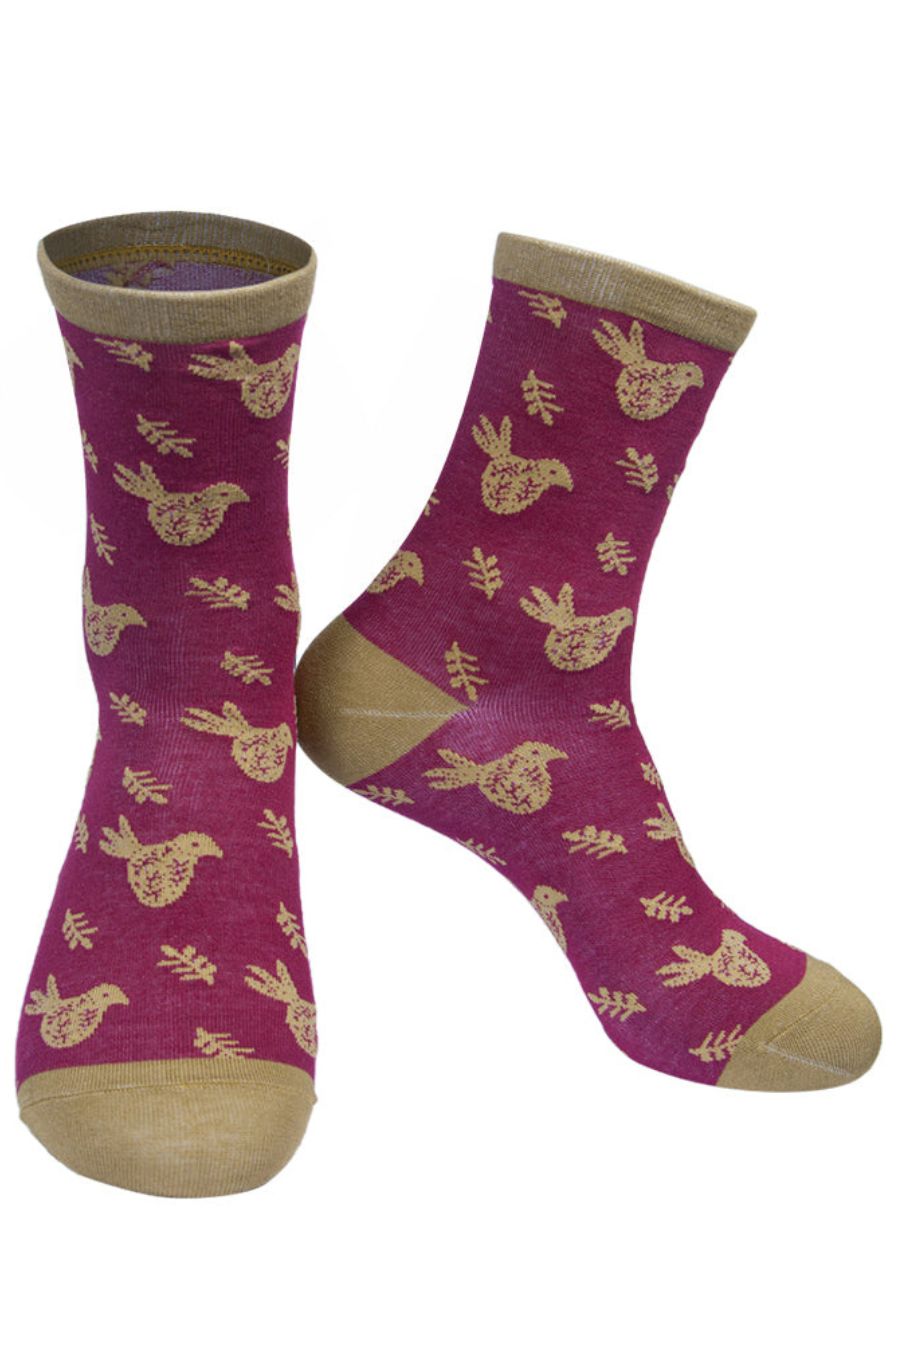 pink  ankle socks with an all over scandi bird print in mustard yellow